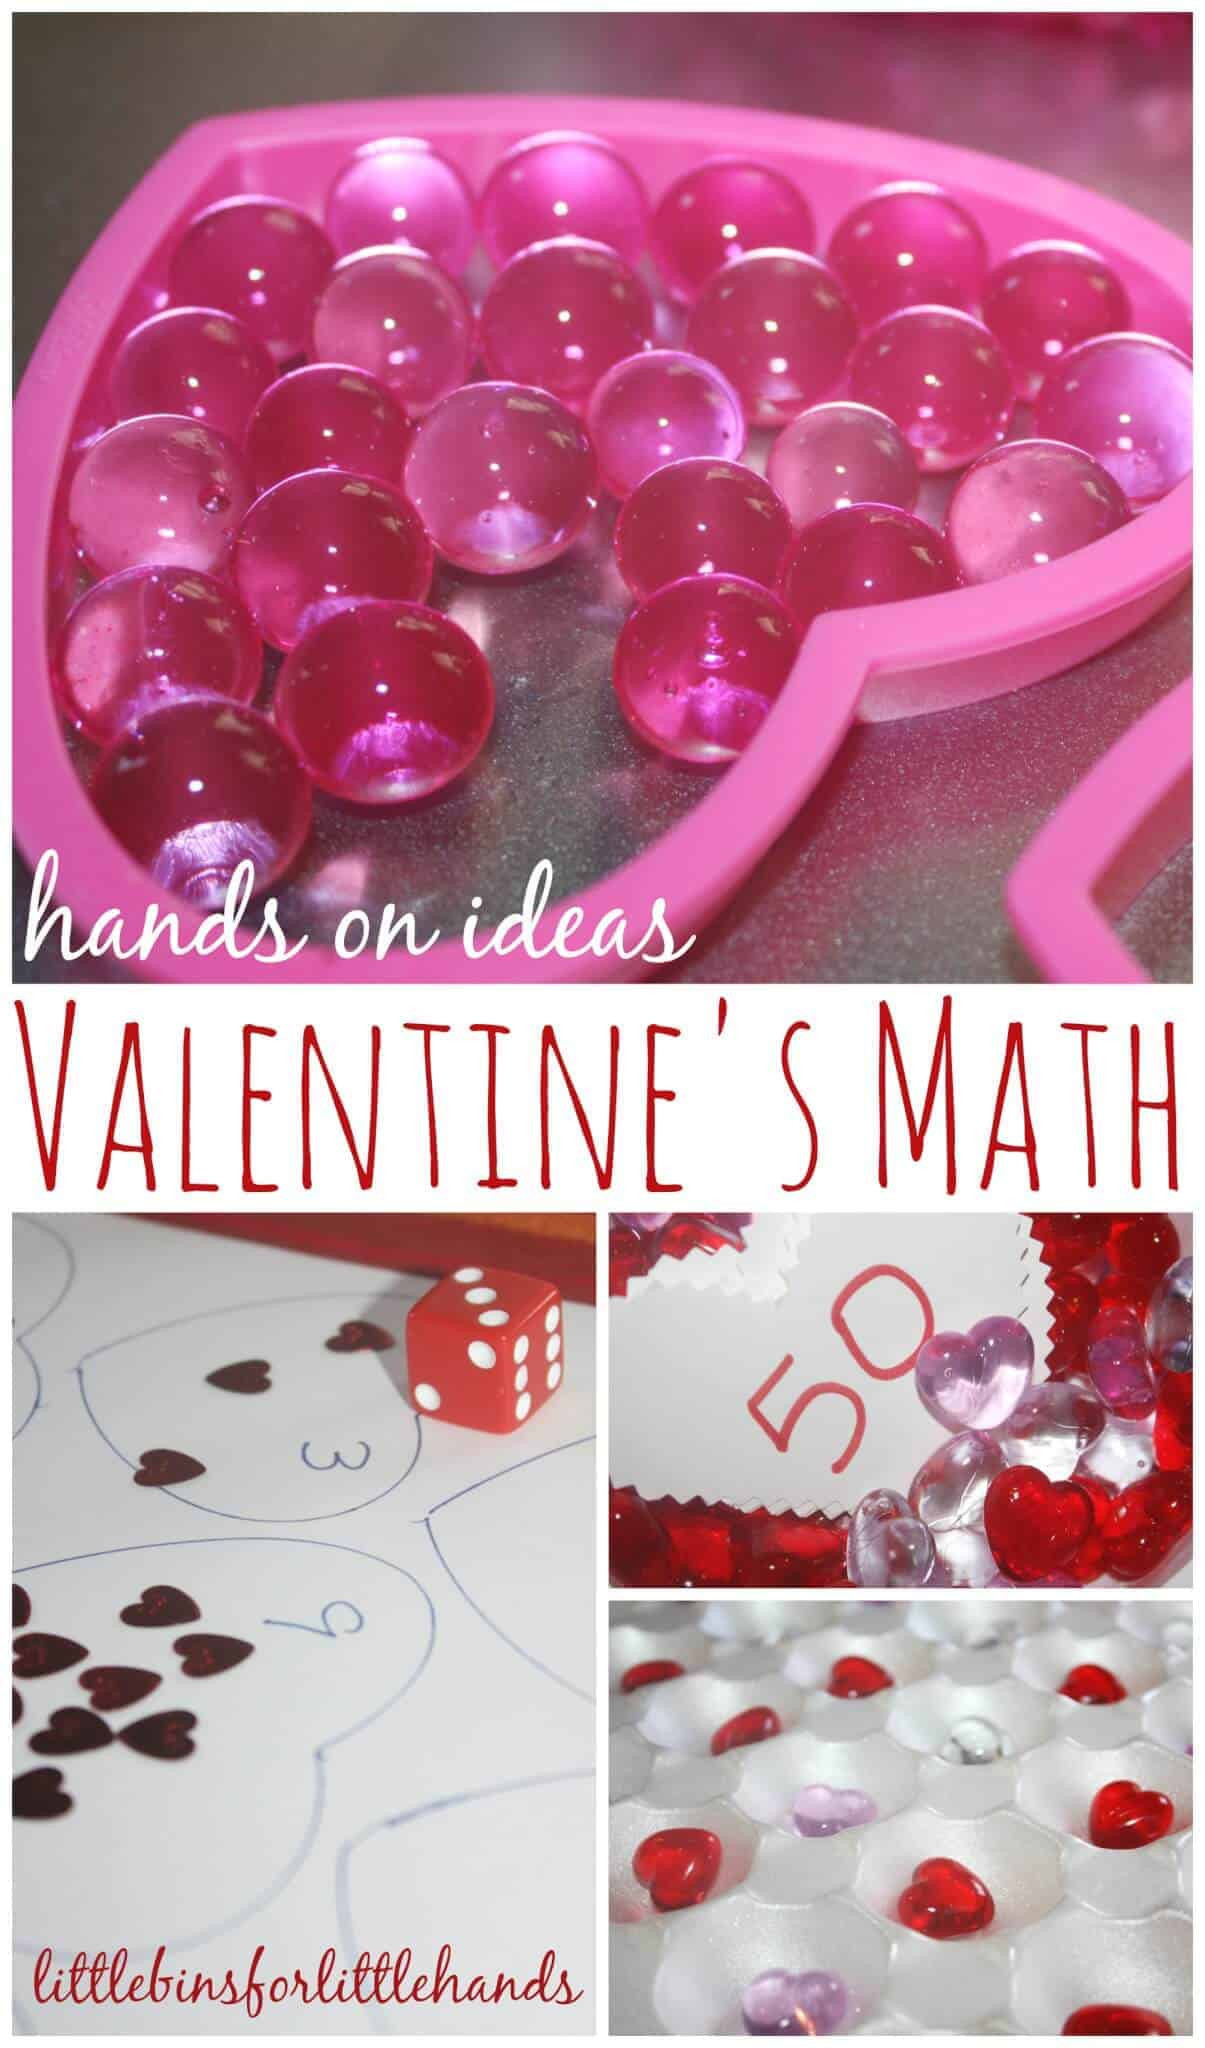 Valentines Day Ideas For Kindergarten
 Valentines Preschool Activities for Early Learning